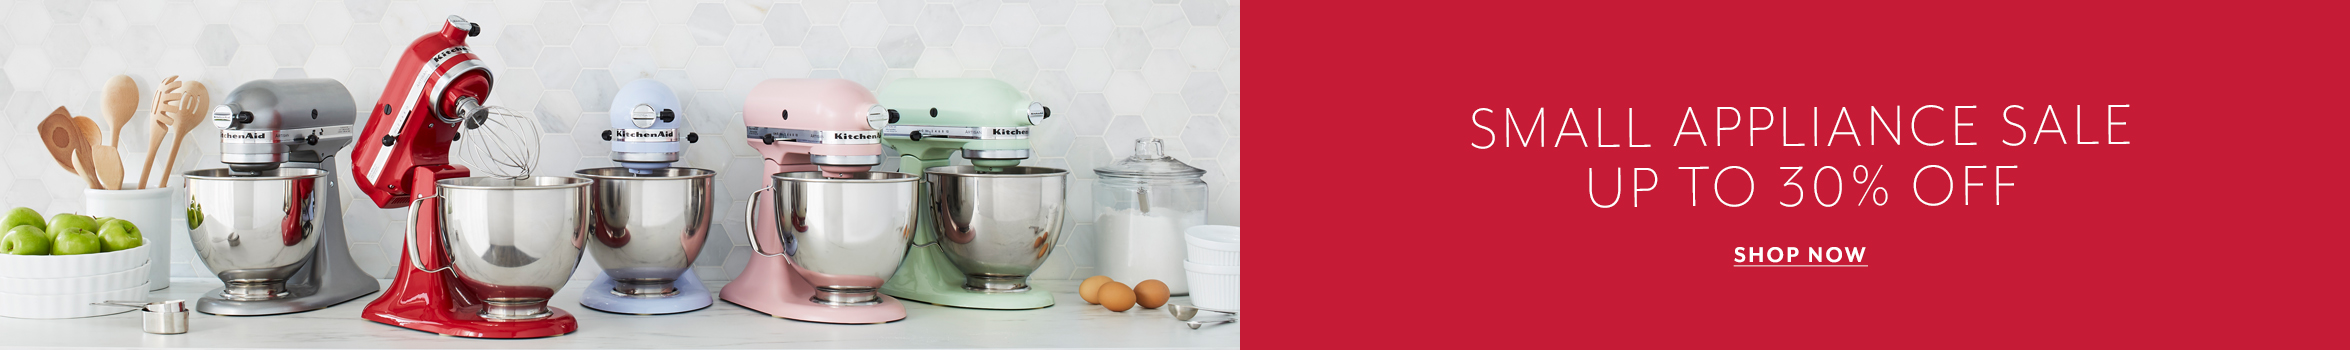 Small Appliance Sale up to 30% off. Red KitchenAid Artisan Stand Mixer.